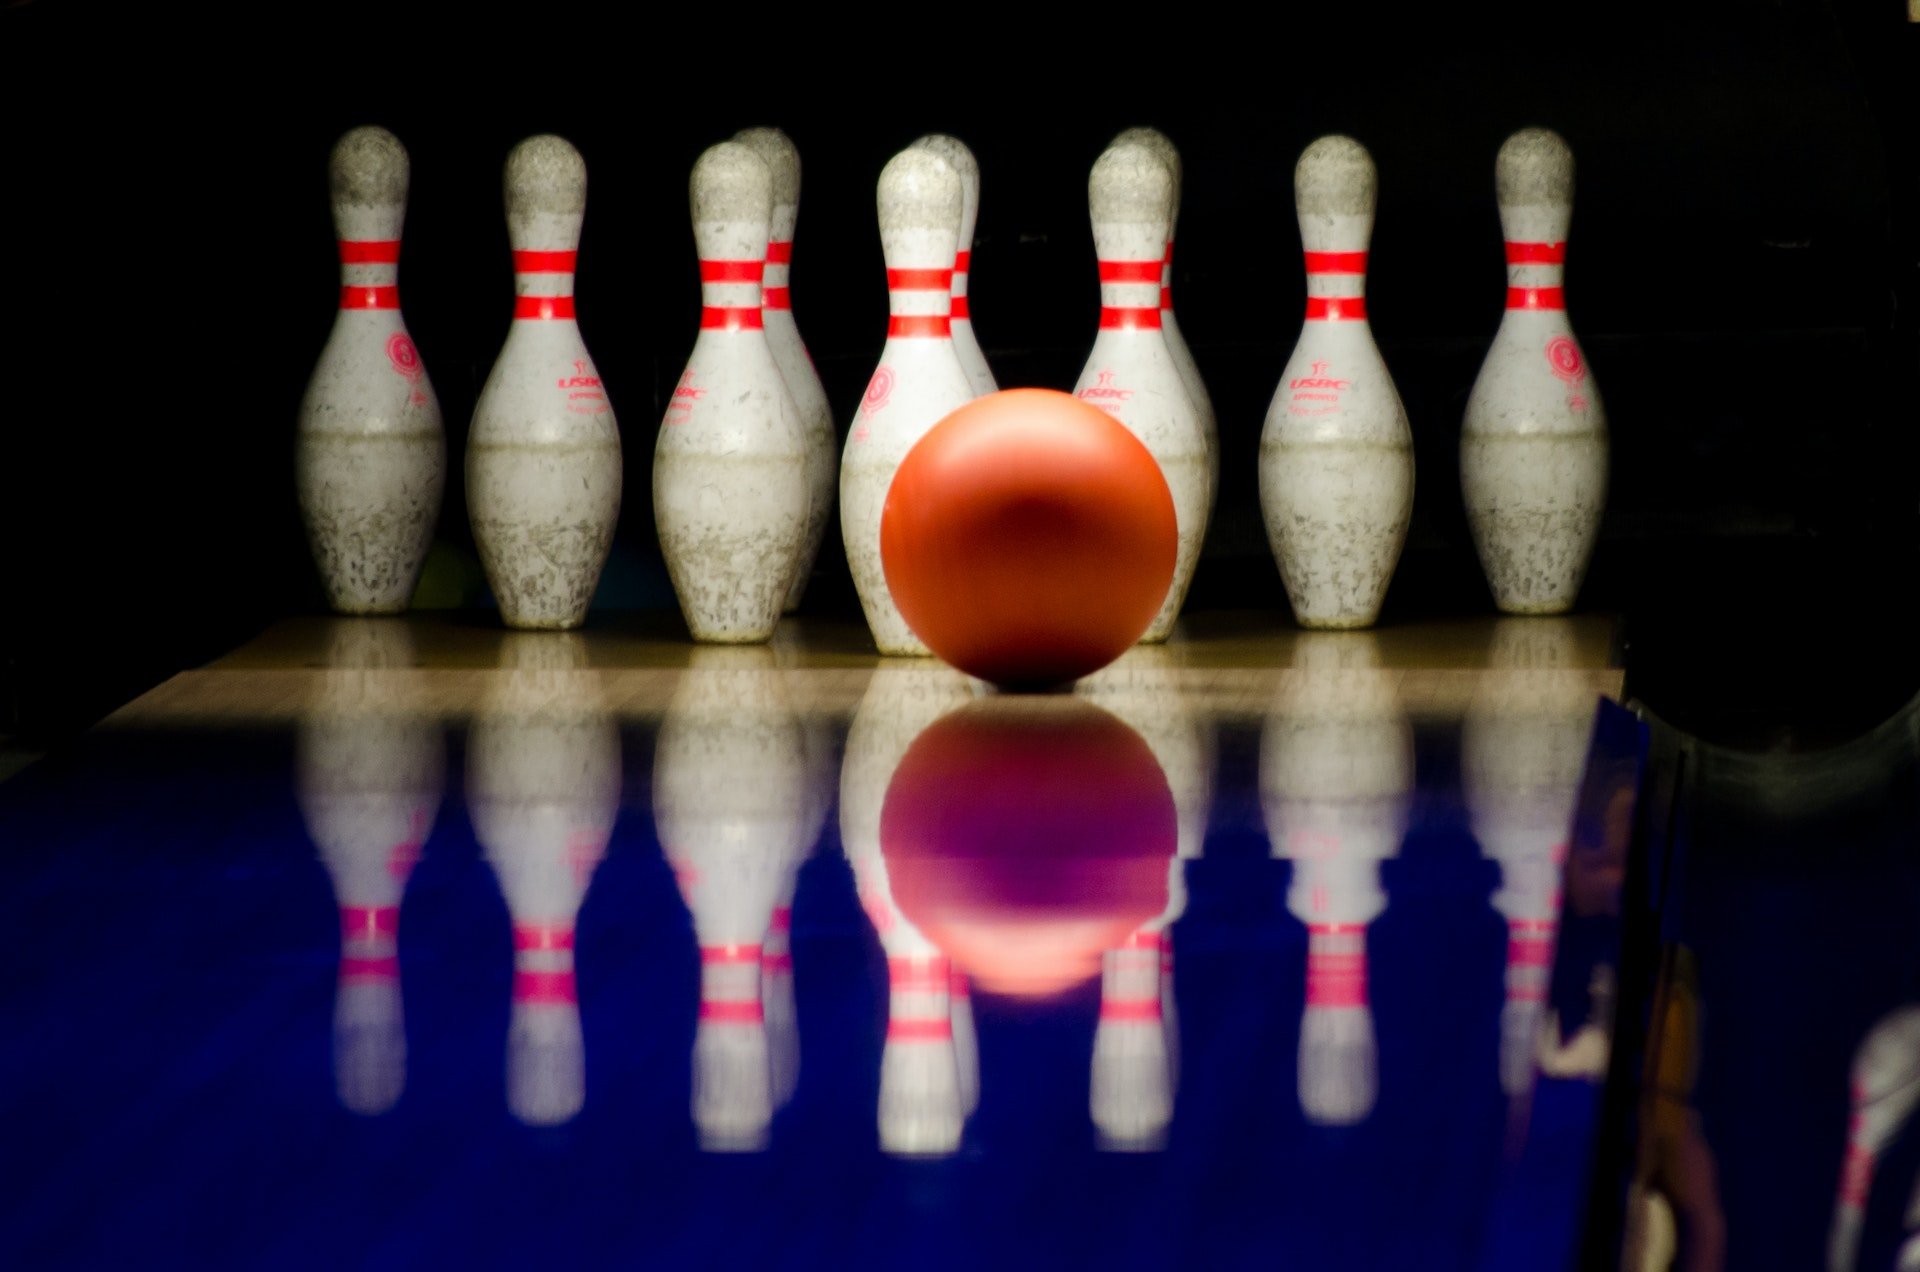 5 Reasons Why Bowling Is the Perfect Place for Your Event